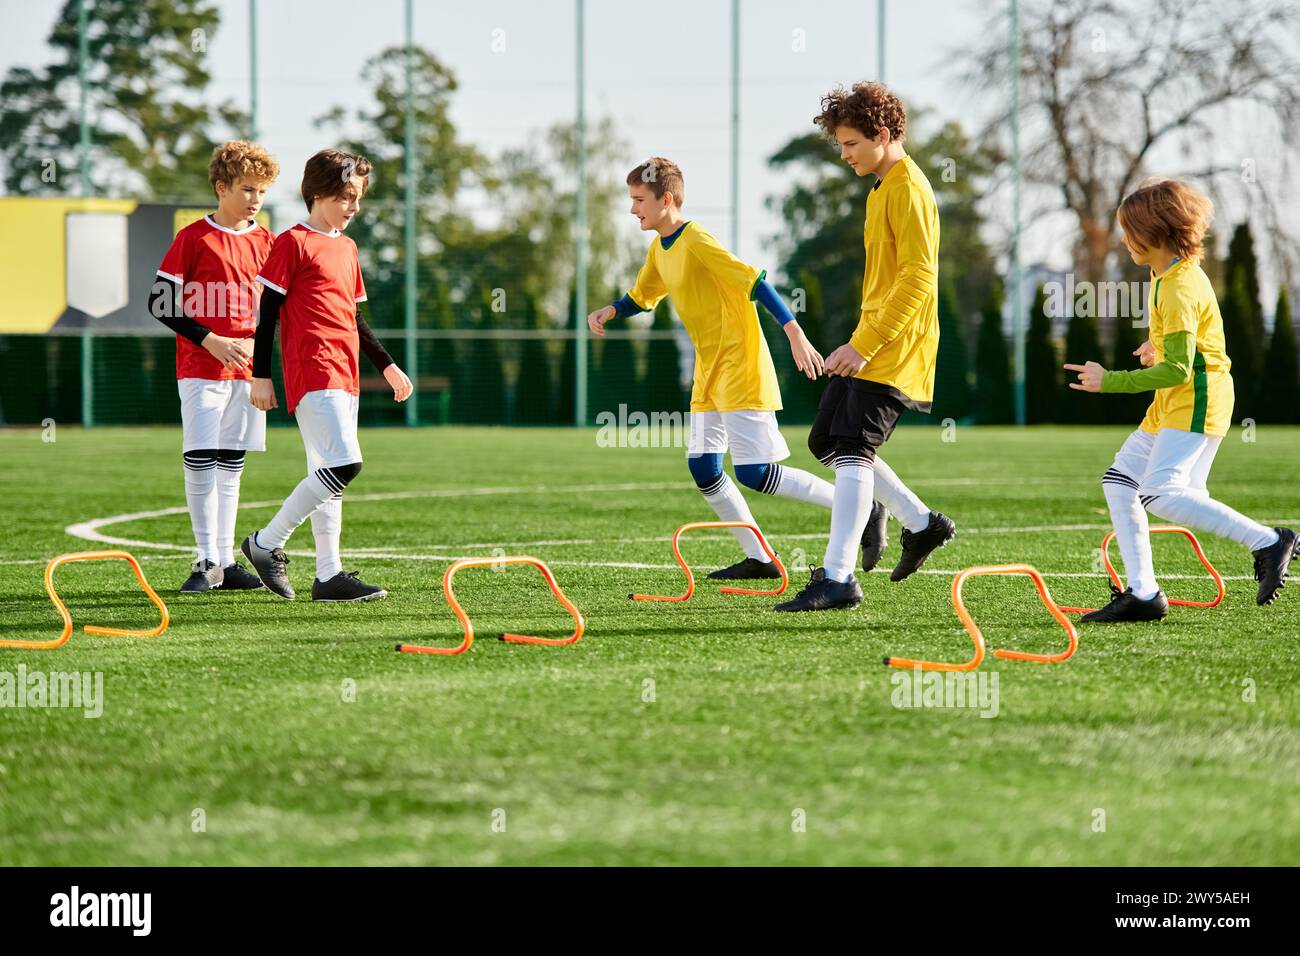 A lively group of young boys engage in a spirited game of soccer, kicking the ball across the field with enthusiasm and skill. Laughter fills the air Stock Photo